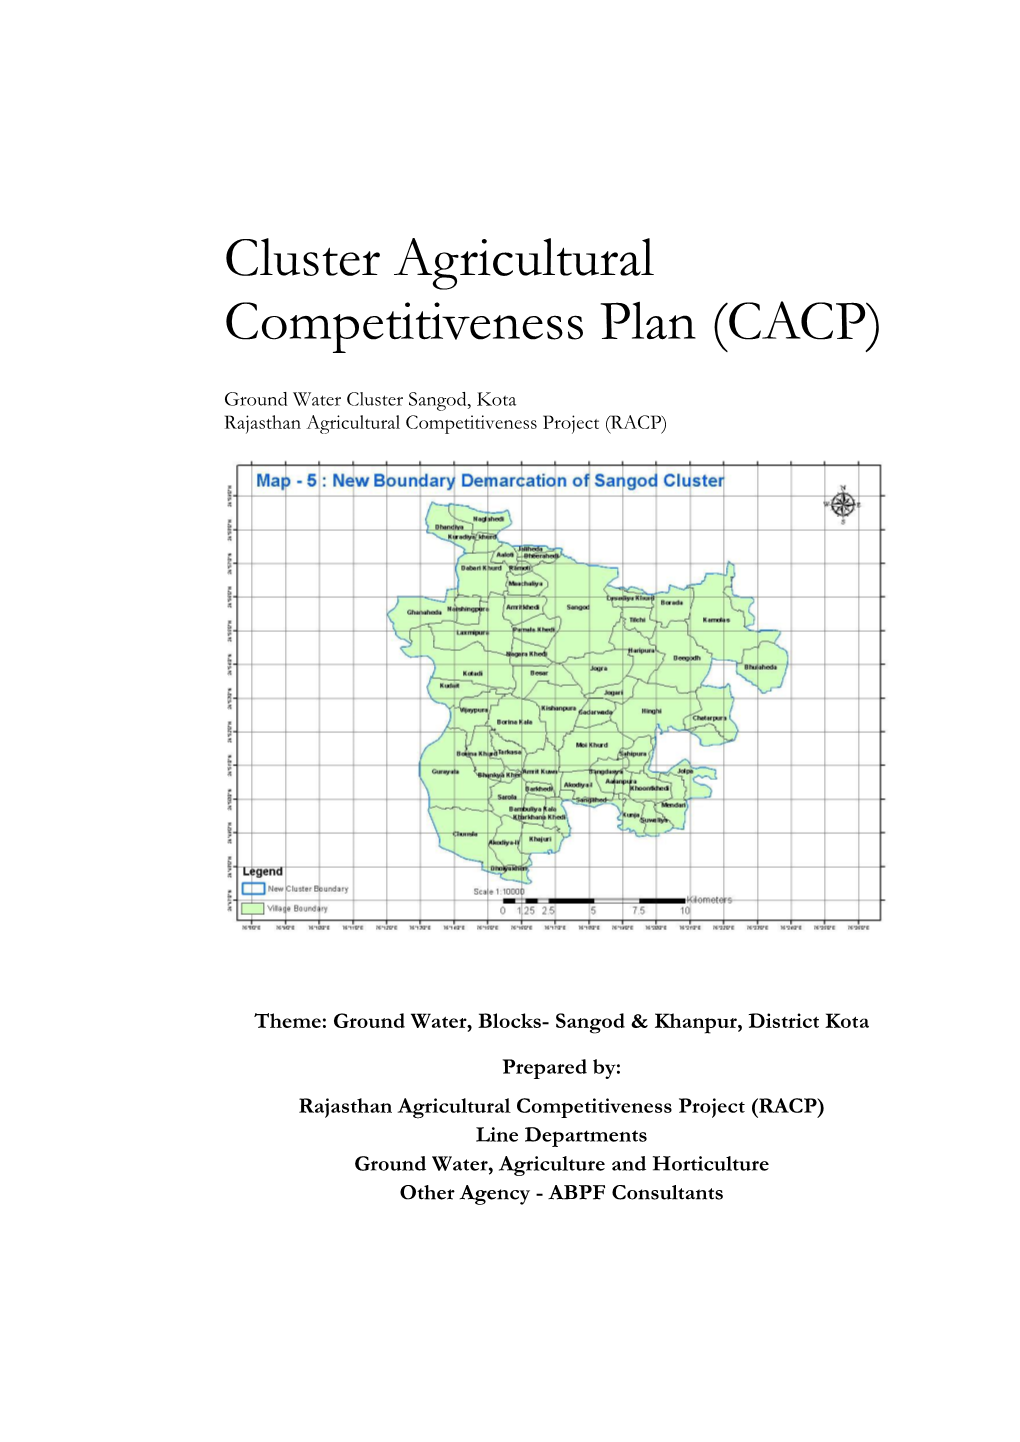 Cluster Agricultural Competitiveness Plan (CACP)